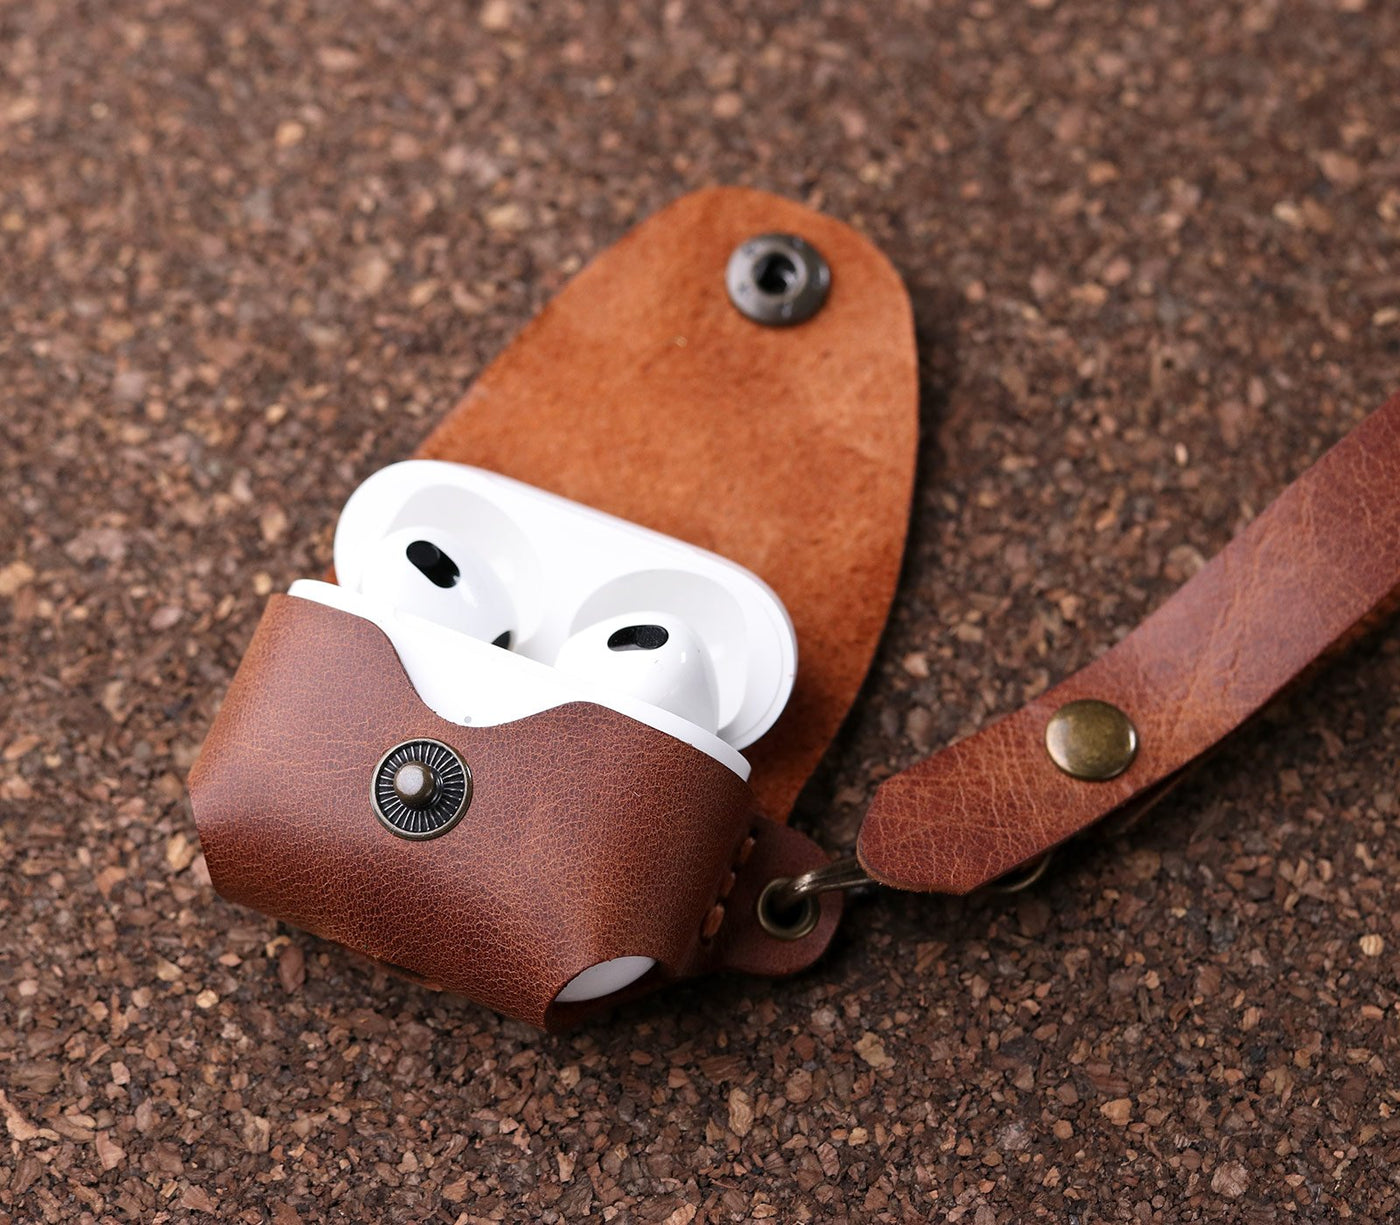 Airpods Leather Case